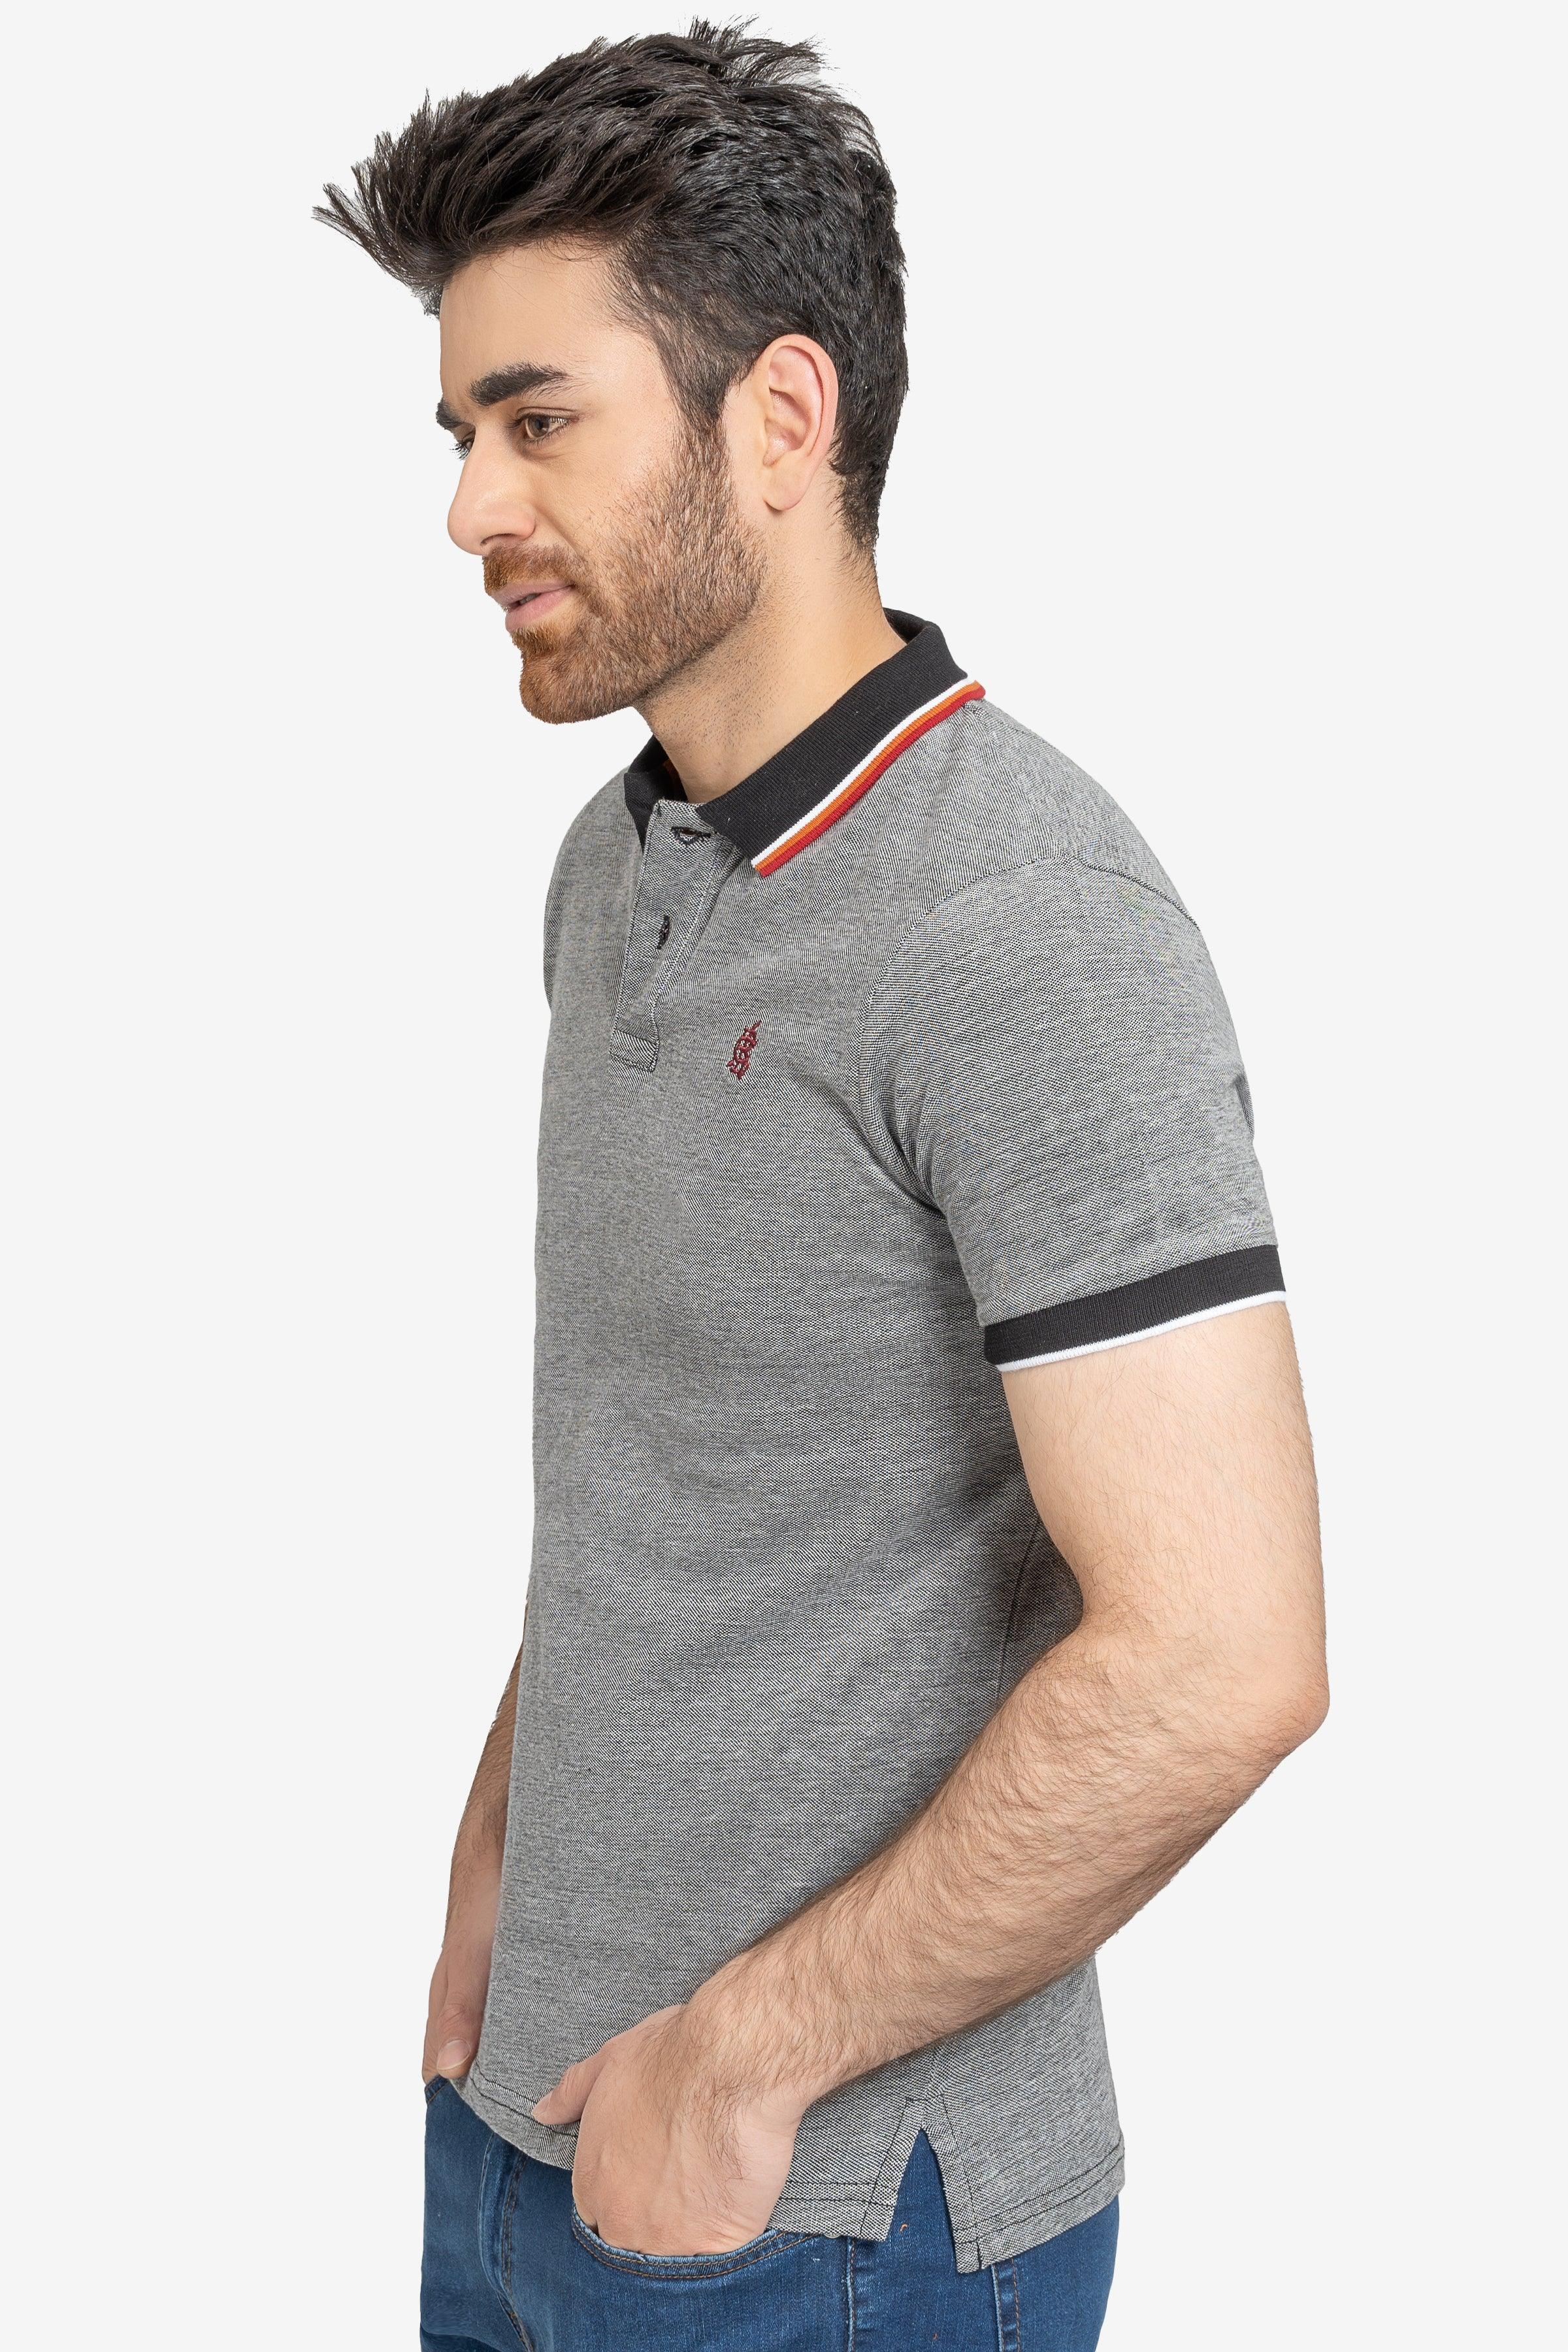 CLASSIC BLACK POLO at Charcoal Clothing